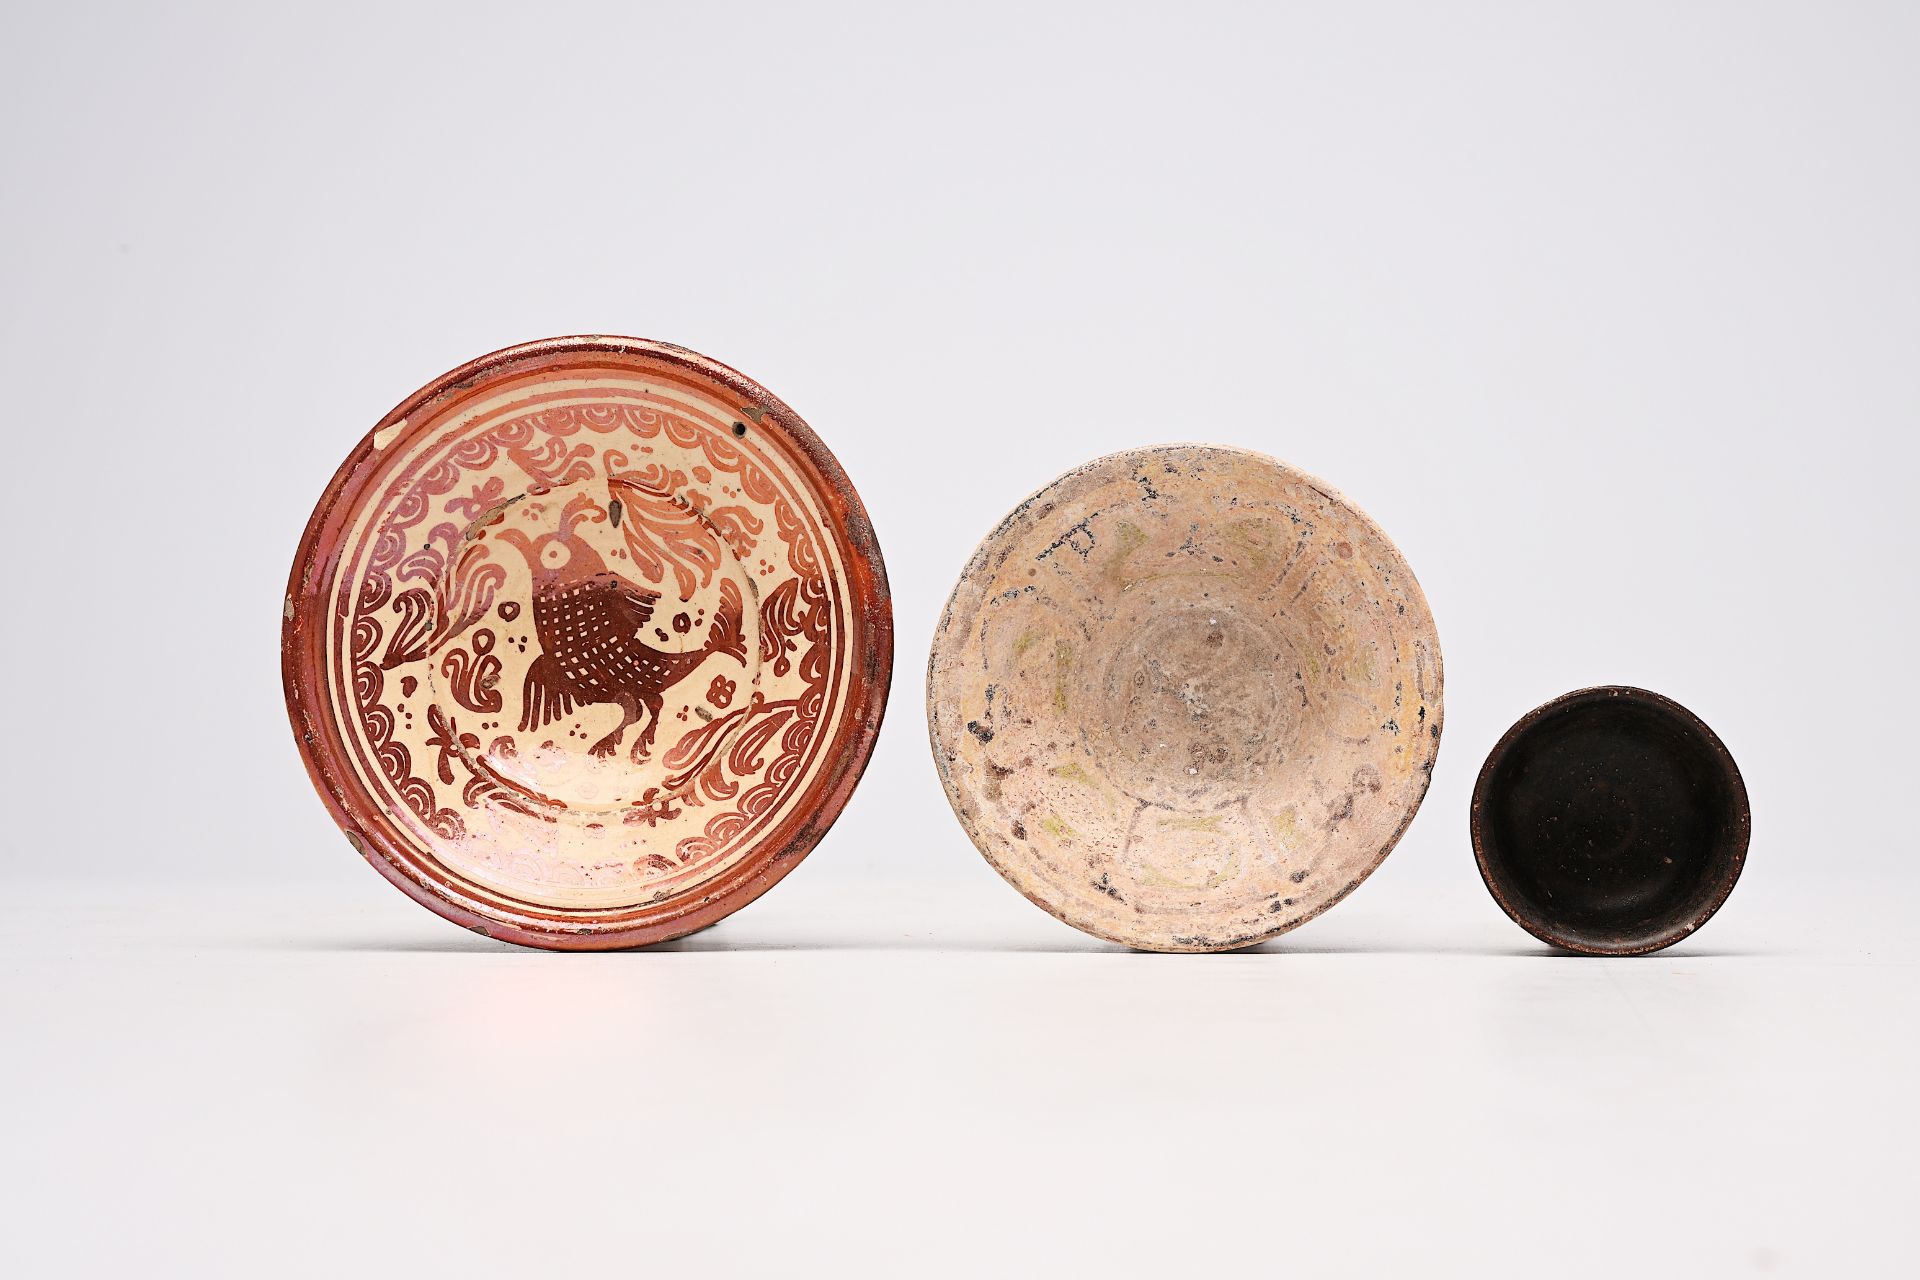 A varied collection of Persian and Hispano-Moresque pottery, 13th C. and later - Image 6 of 7